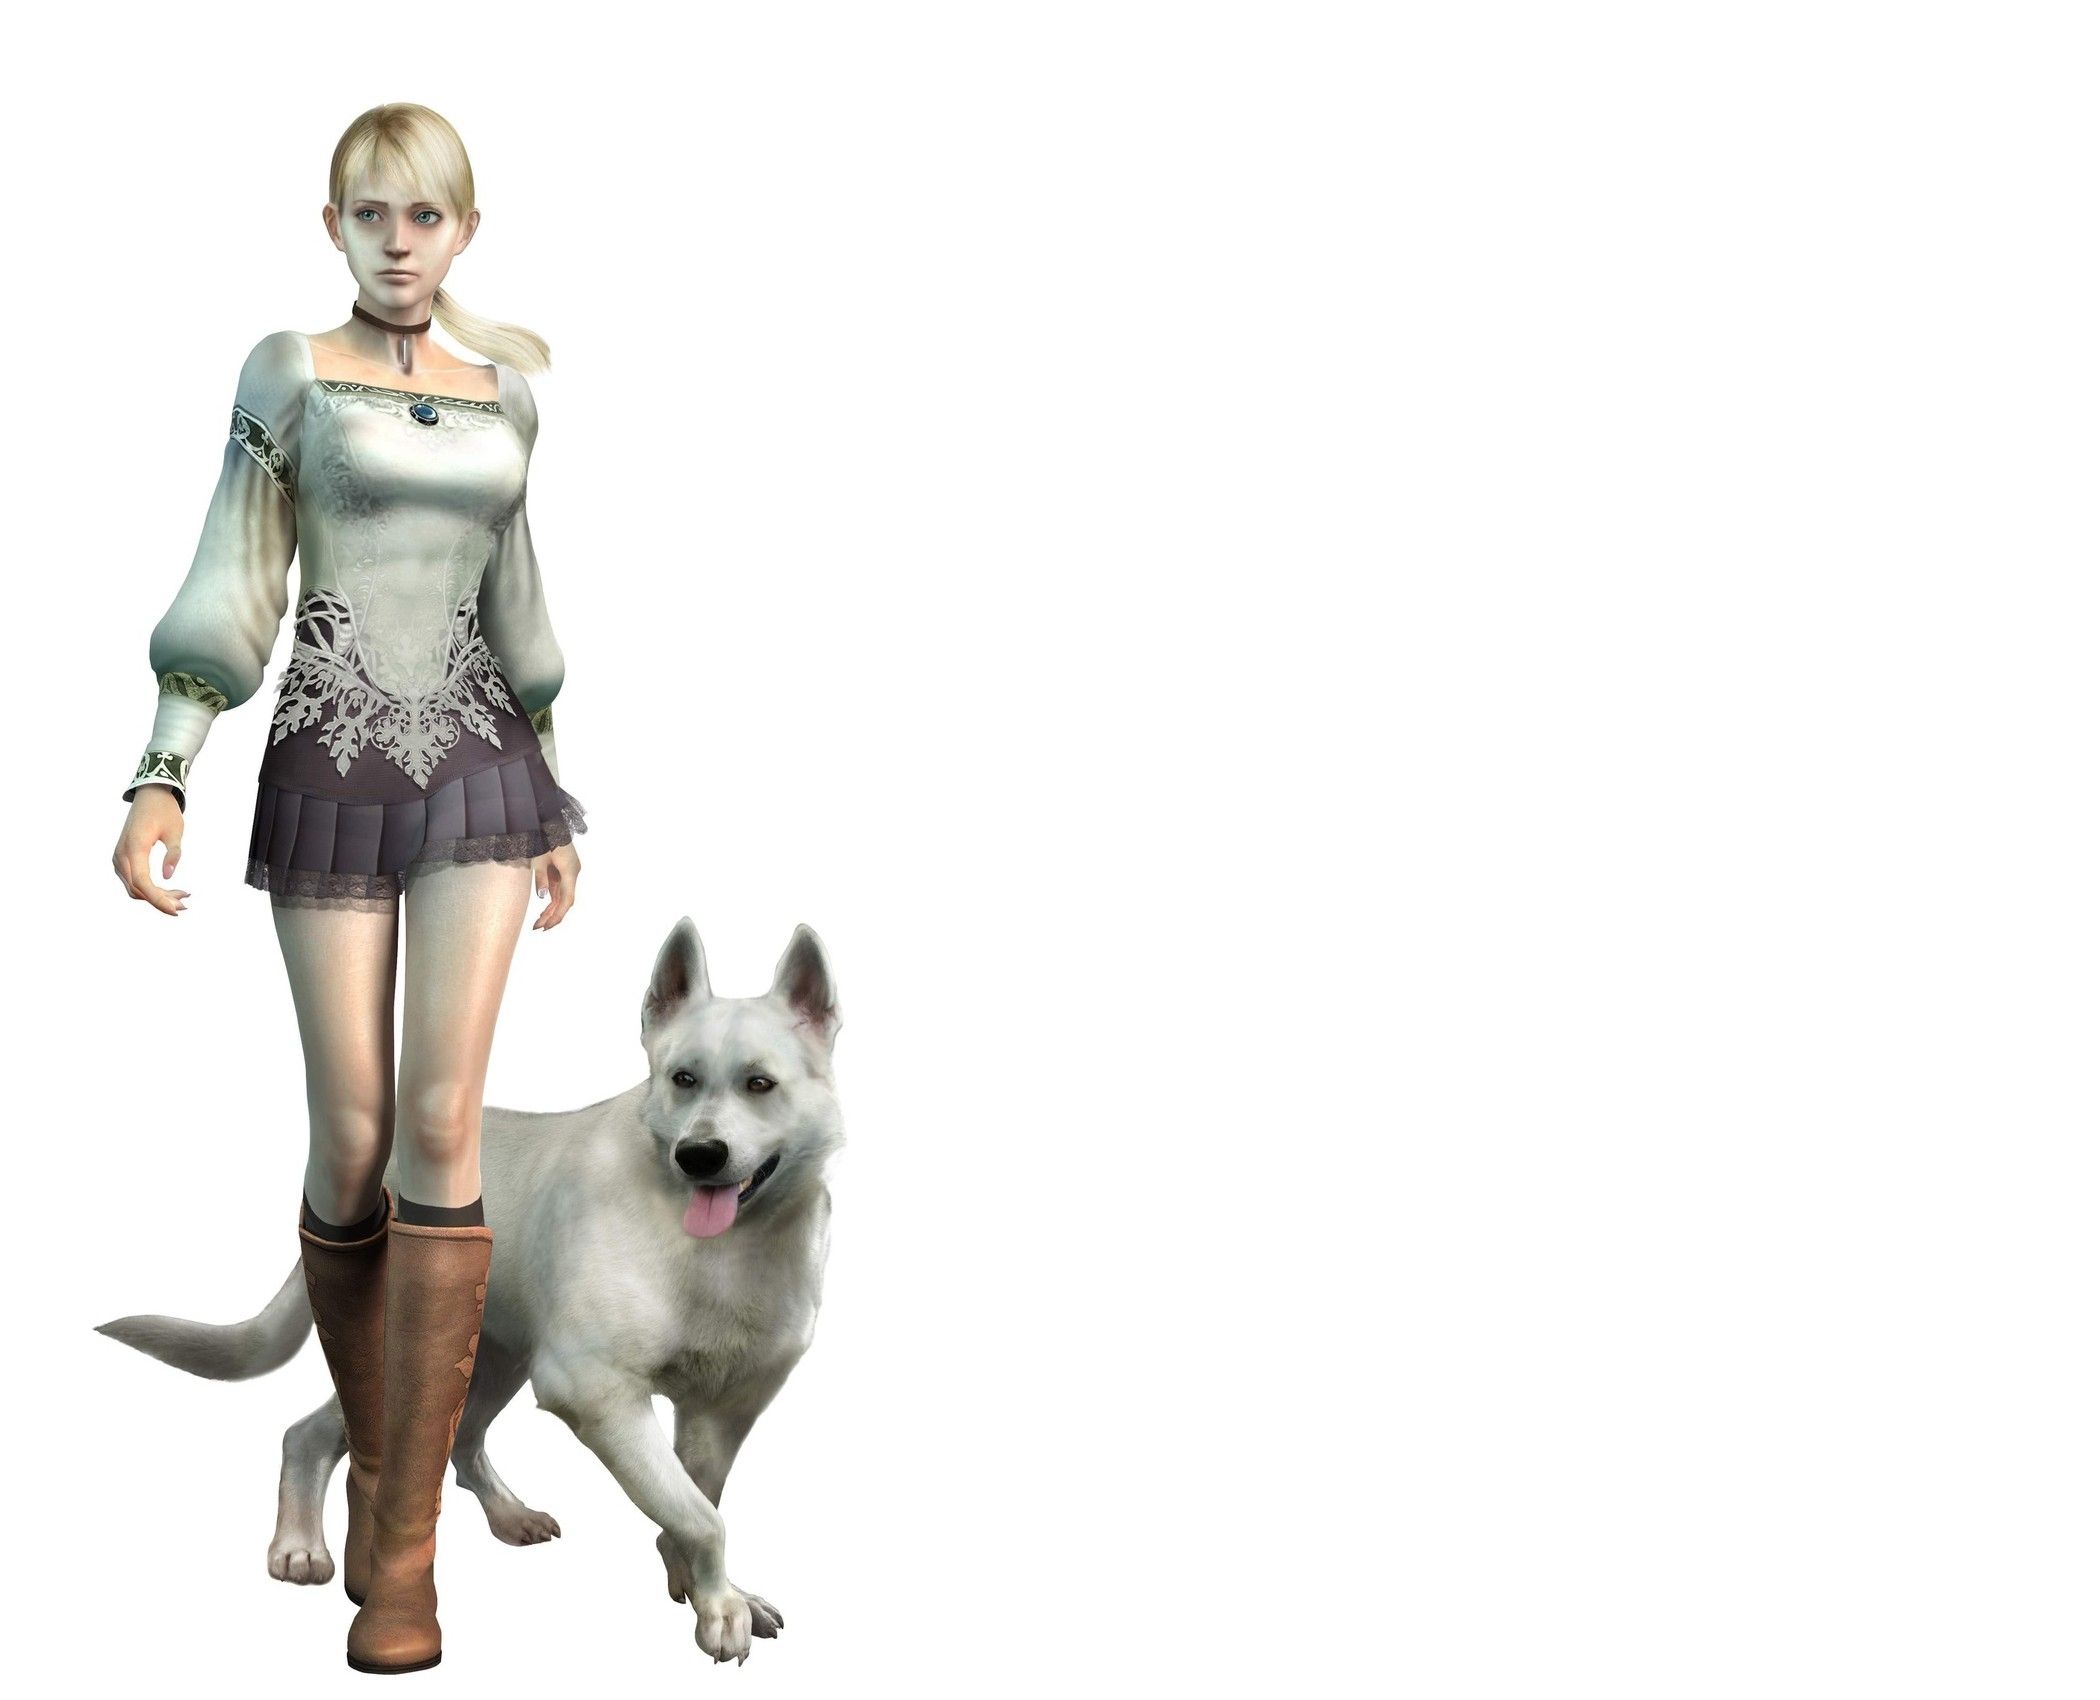 blondes women 3D view video games dogs terror haunting grounds 2100x1700 wallpaper High Quality Wallpaper, High Definition Wallpaper